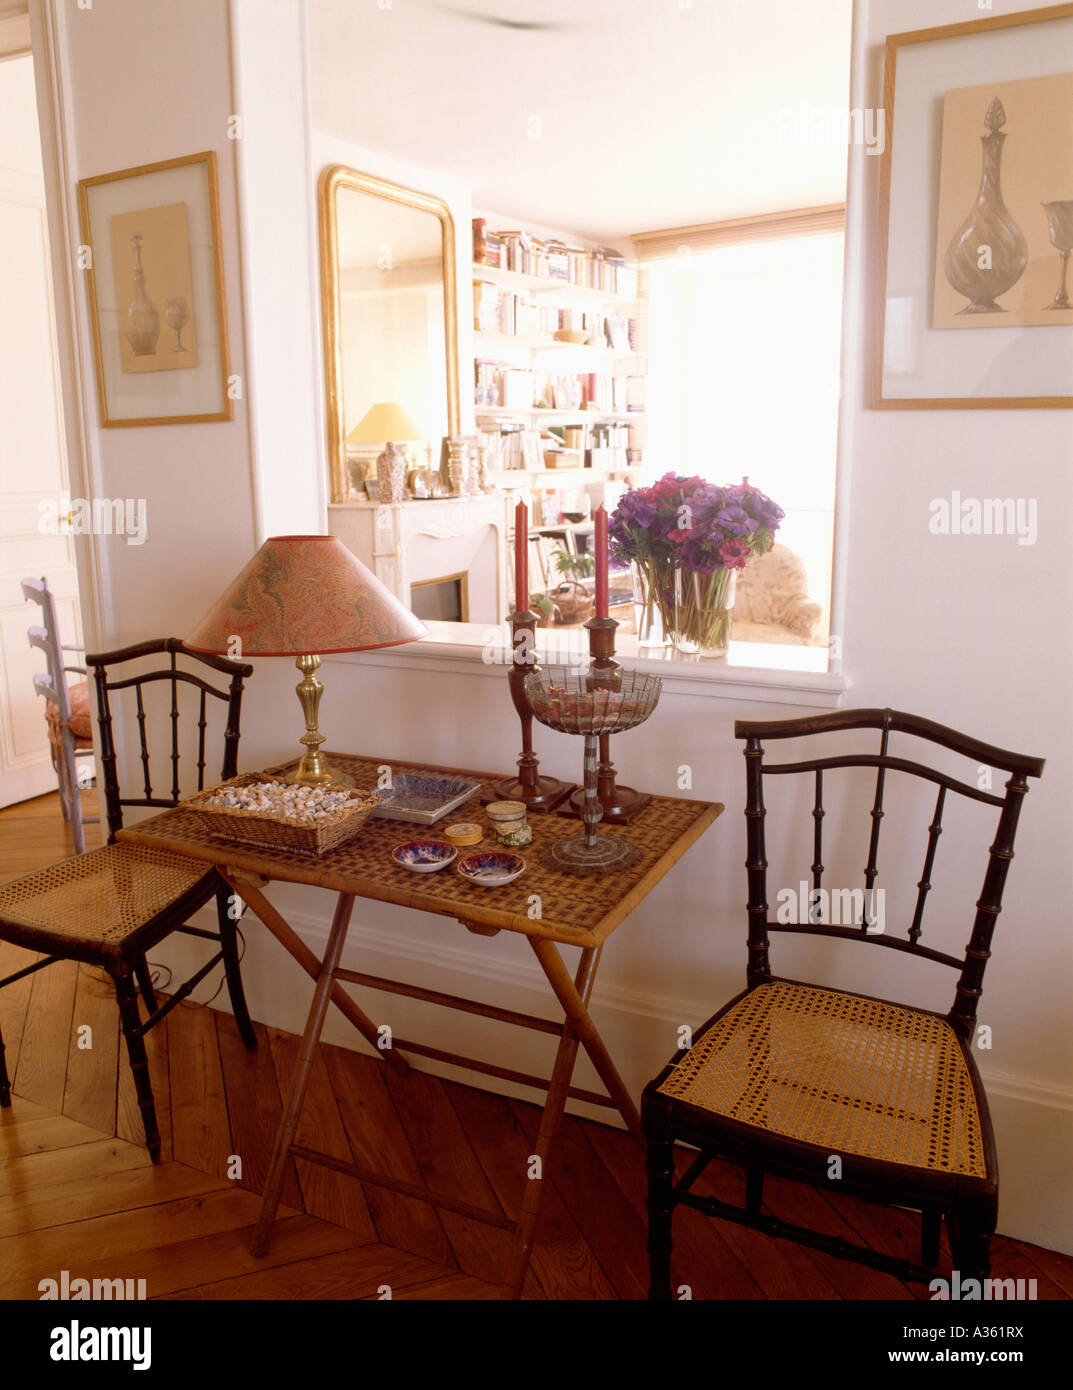 Antique Dining Chairs And Small Wooden Table In Front Of Half Wall In Stock Photo Alamy